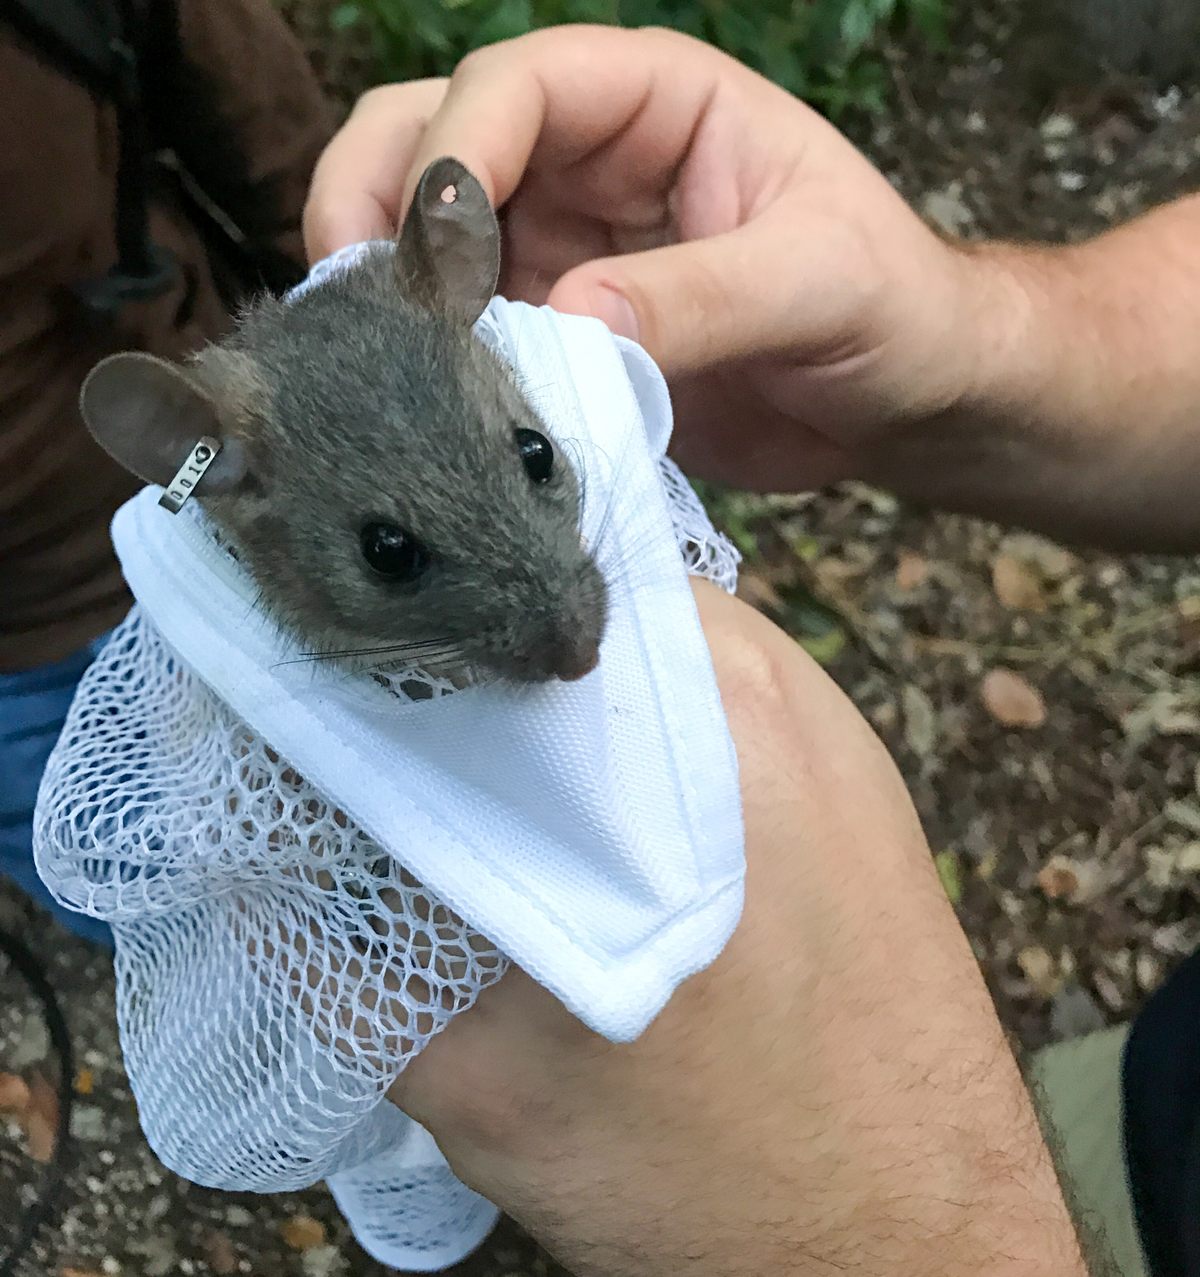 The DeGayner brothers spent their own money and much of their retirement laboring to bring the Key Largo woodrat back from the brink of extinction.